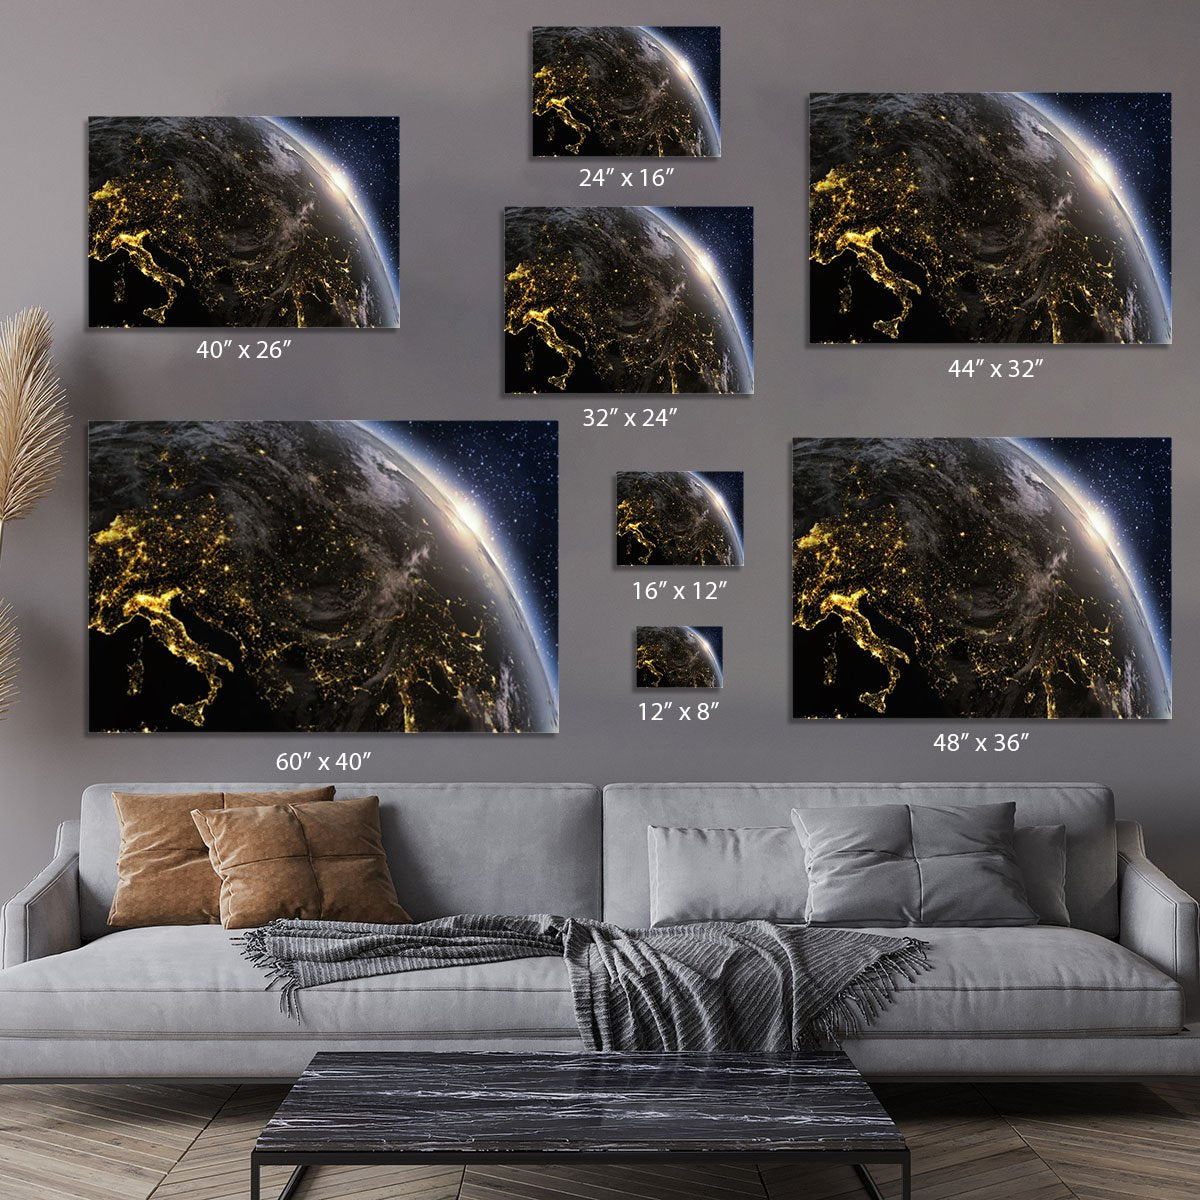 Planet earth Europe zone Canvas Print or Poster